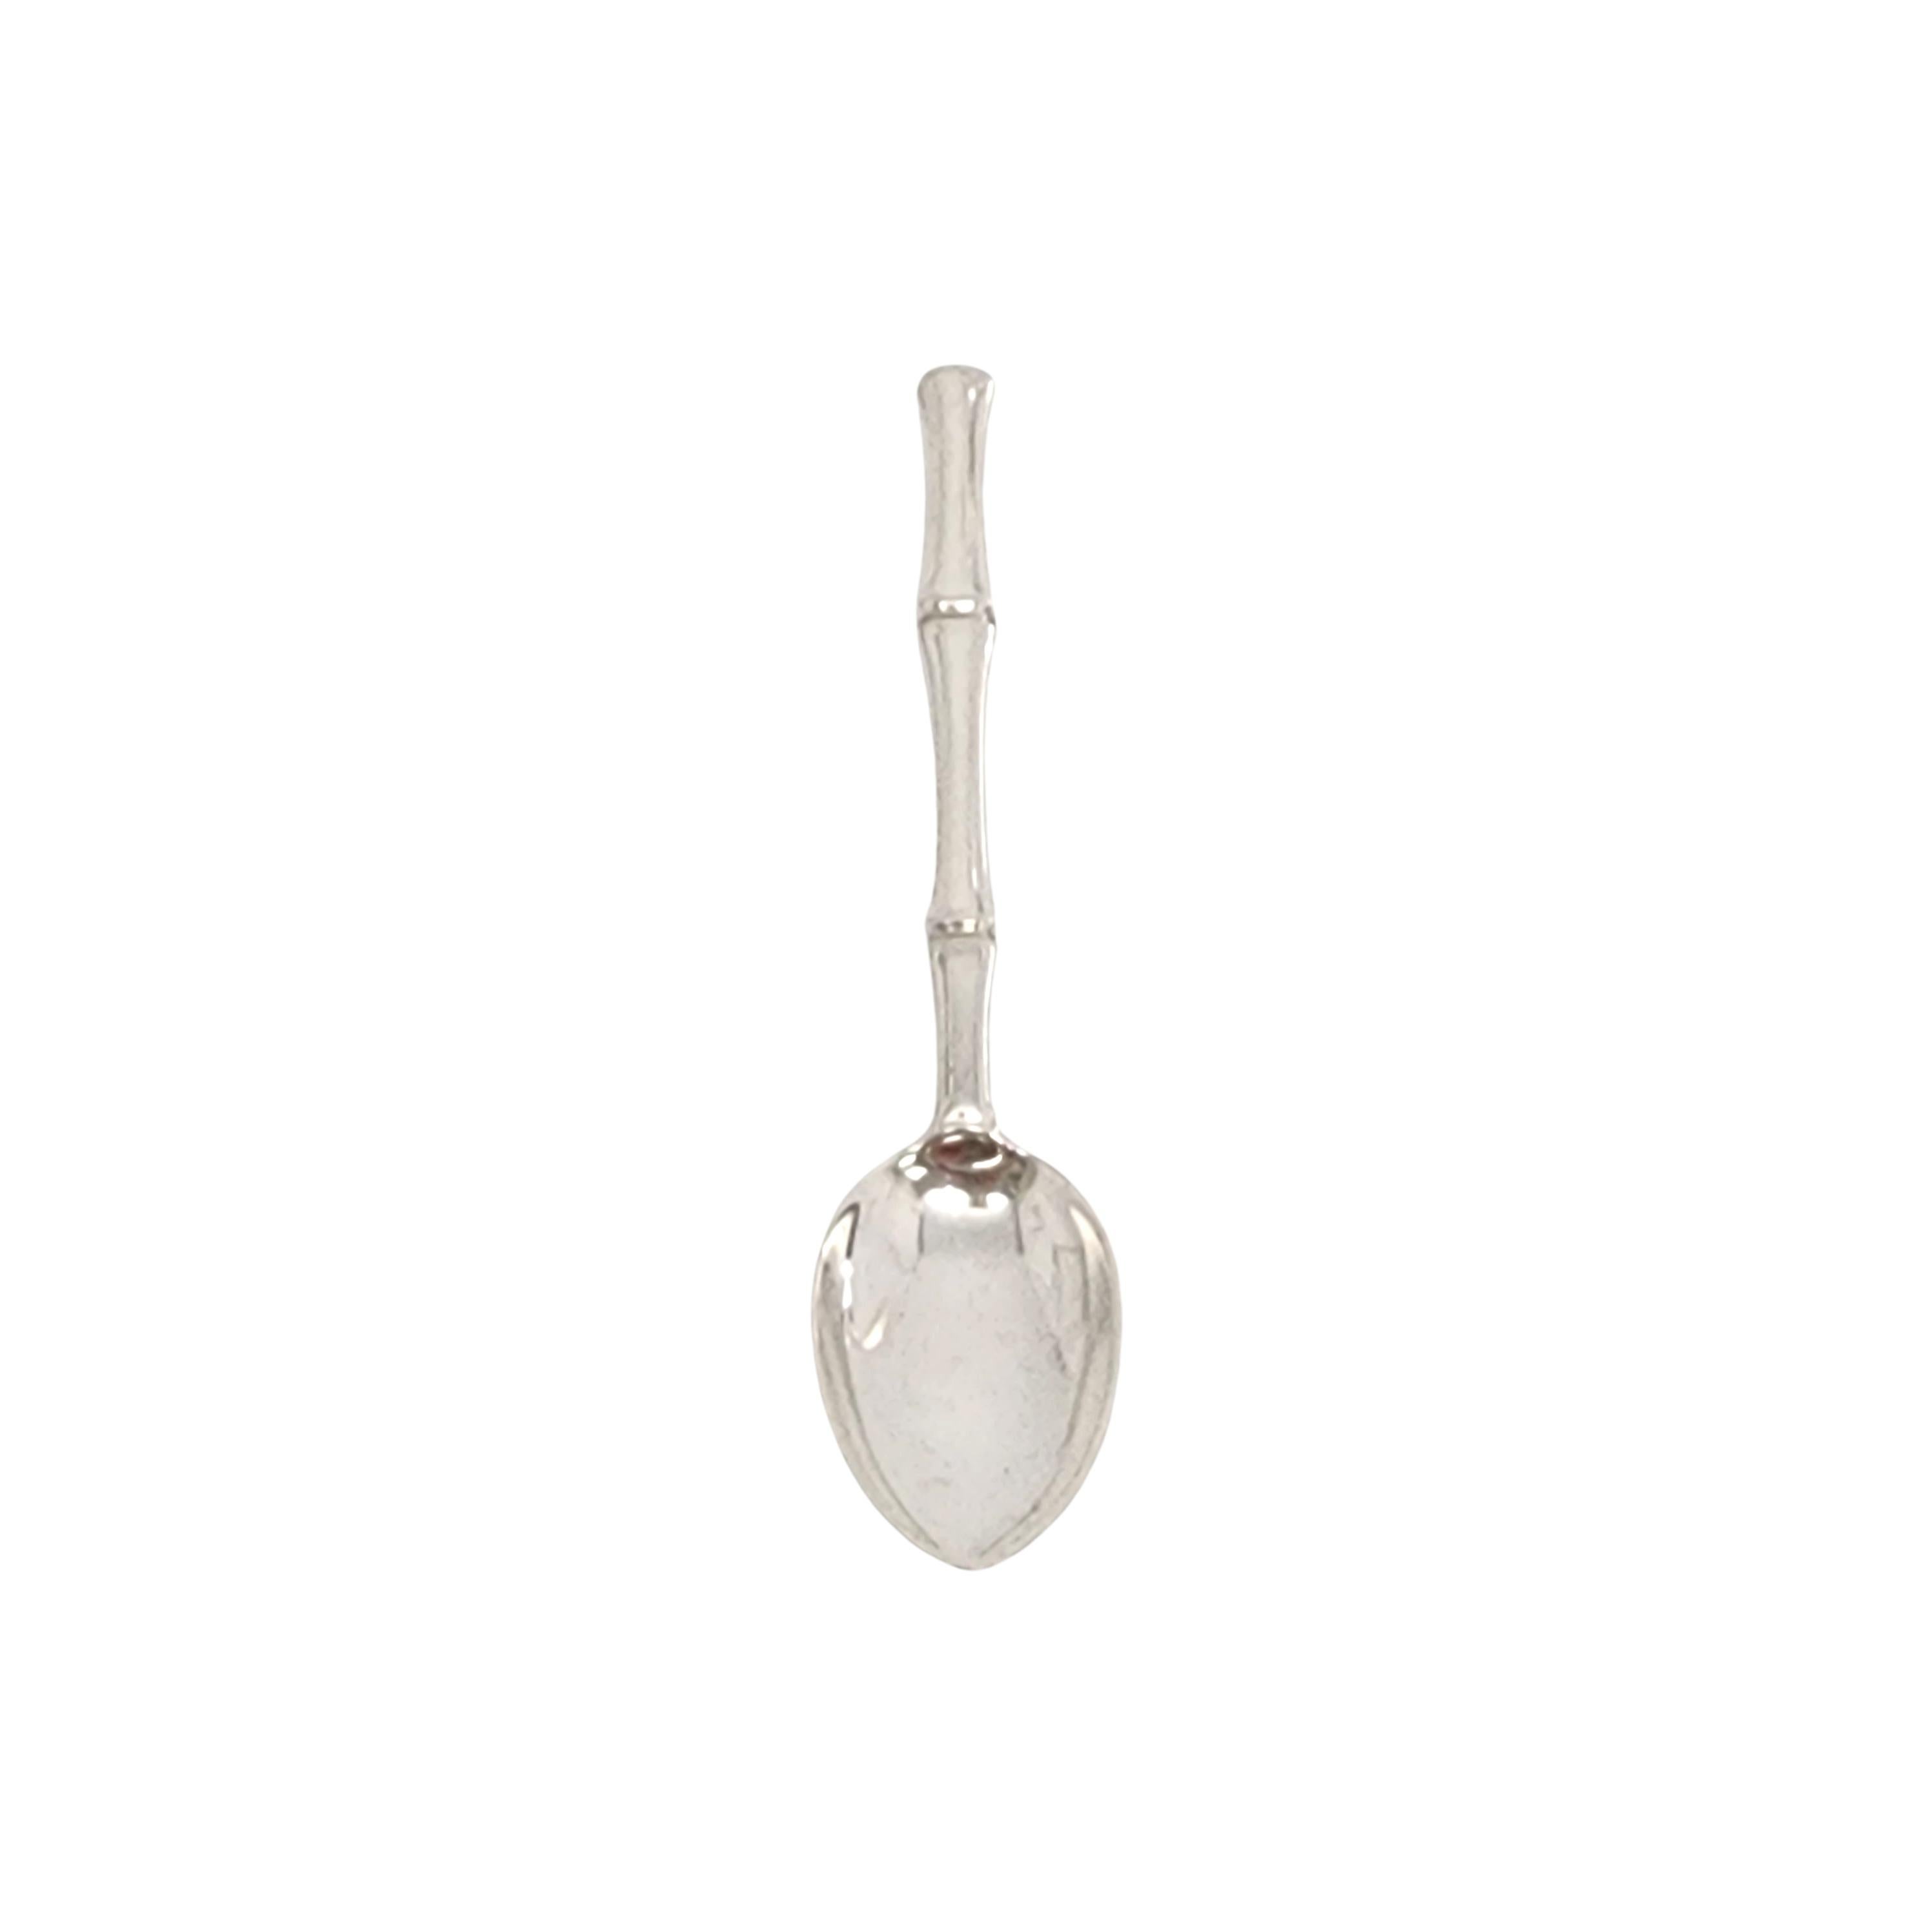 Tiffany & Co Sterling Silver Bamboo Demitasse Spoon 1